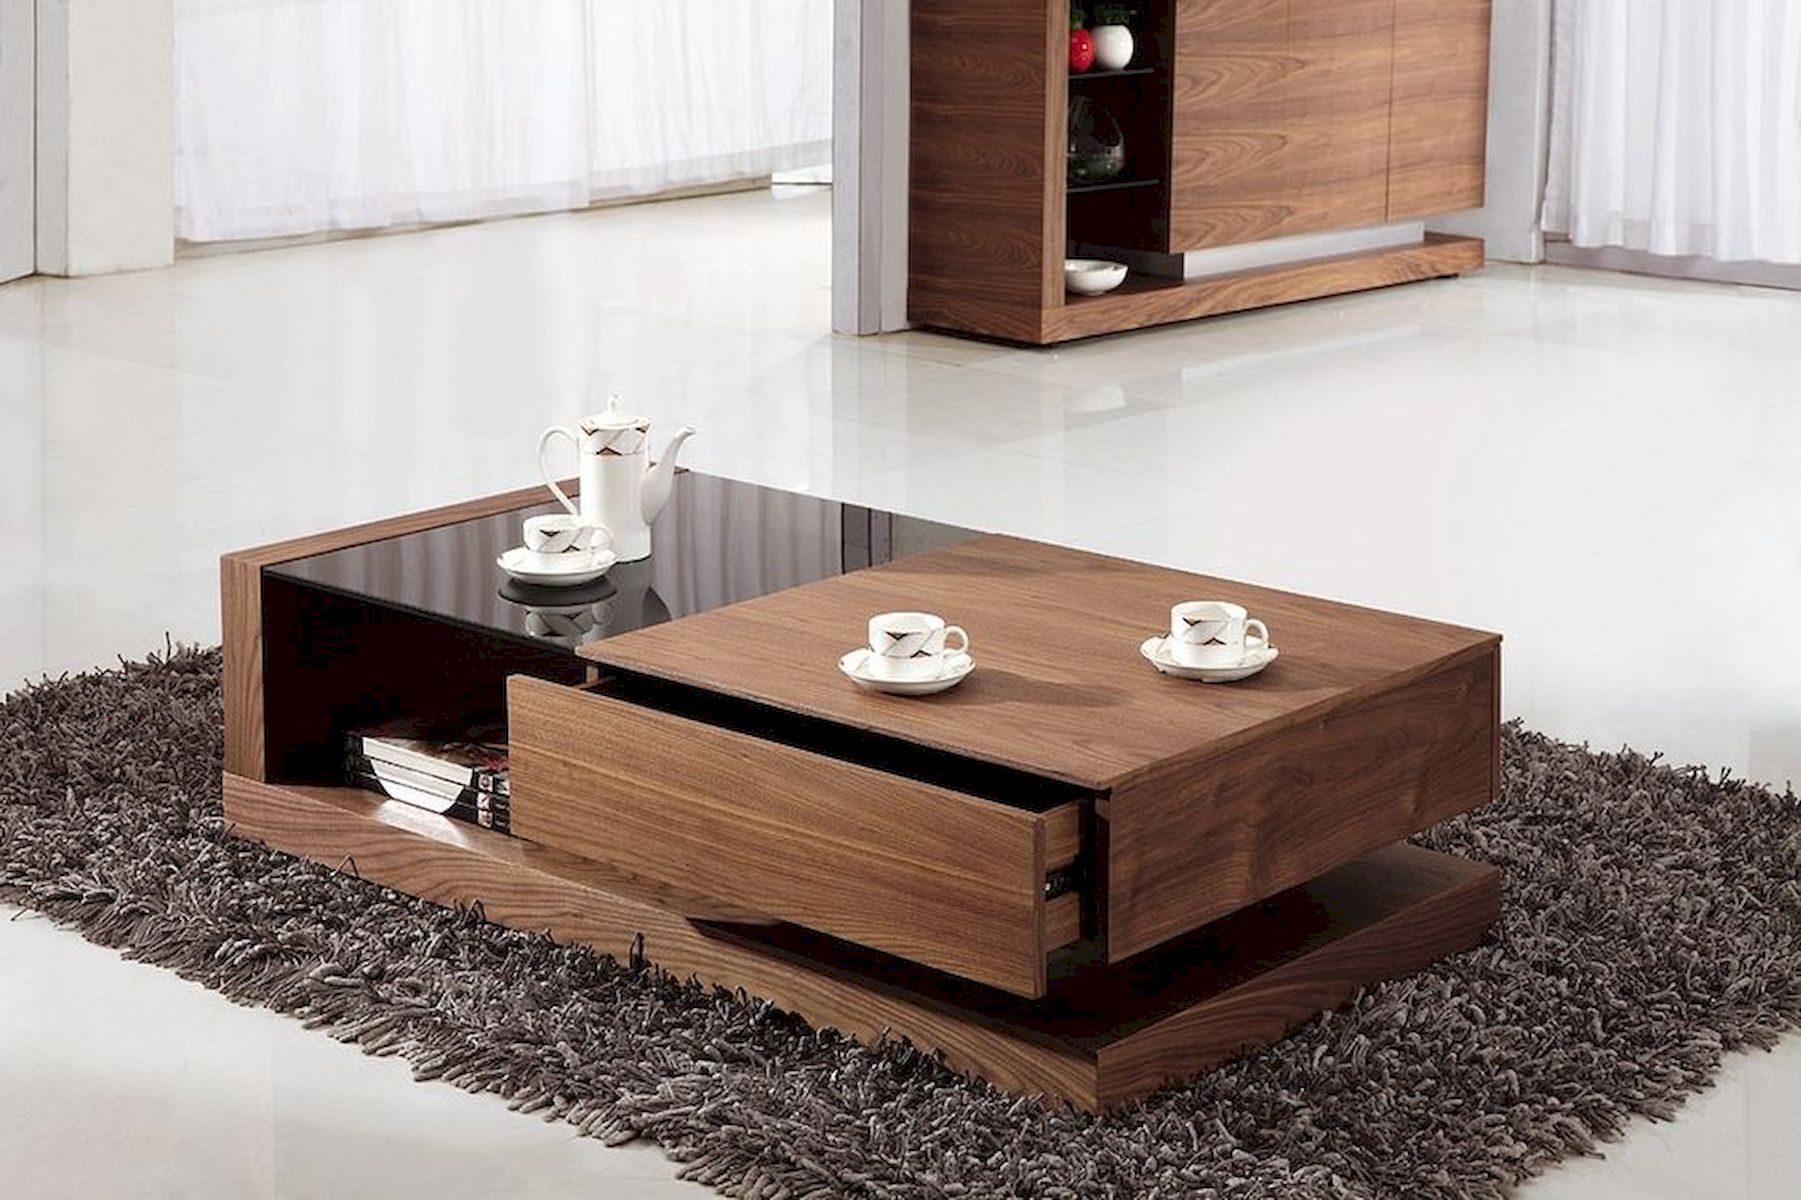 Wooden Coffee Table Designs: Ideas For Your Home – Coffee Table Decor Regarding Modern Wooden X Design Coffee Tables (View 11 of 15)